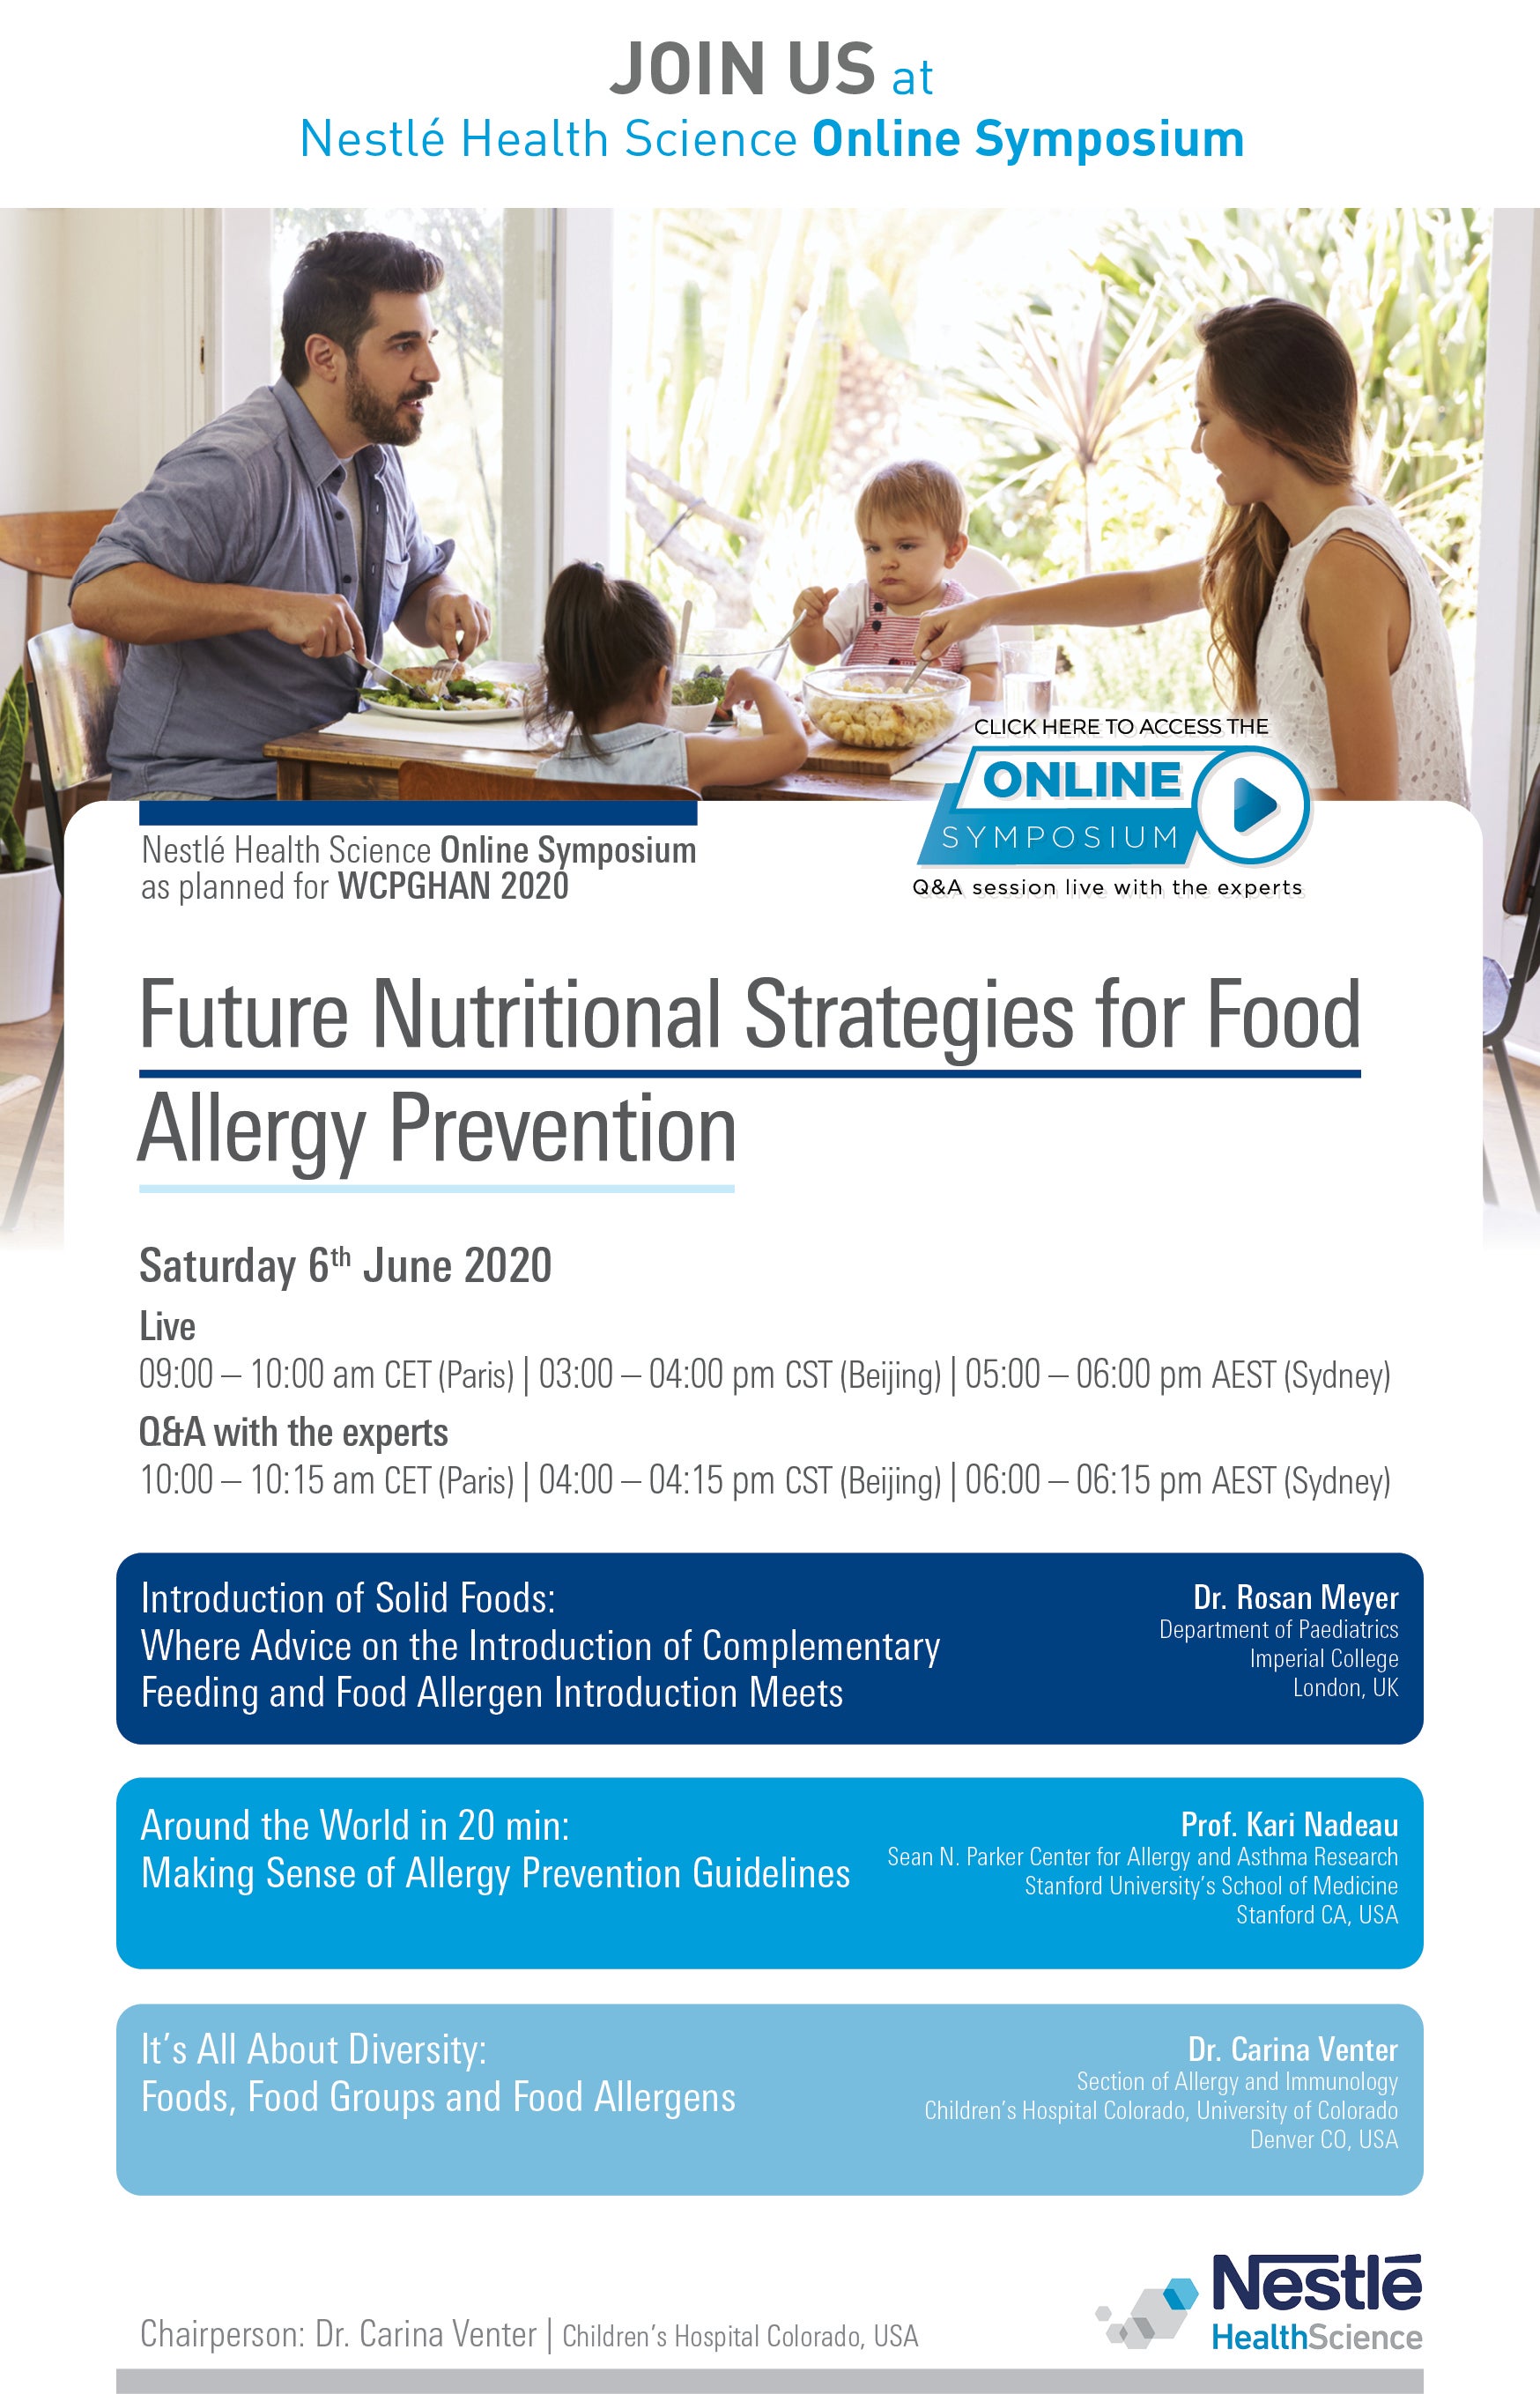 NHSc online symposium – Future Nutritional Strategies for Food Allergy Prevention